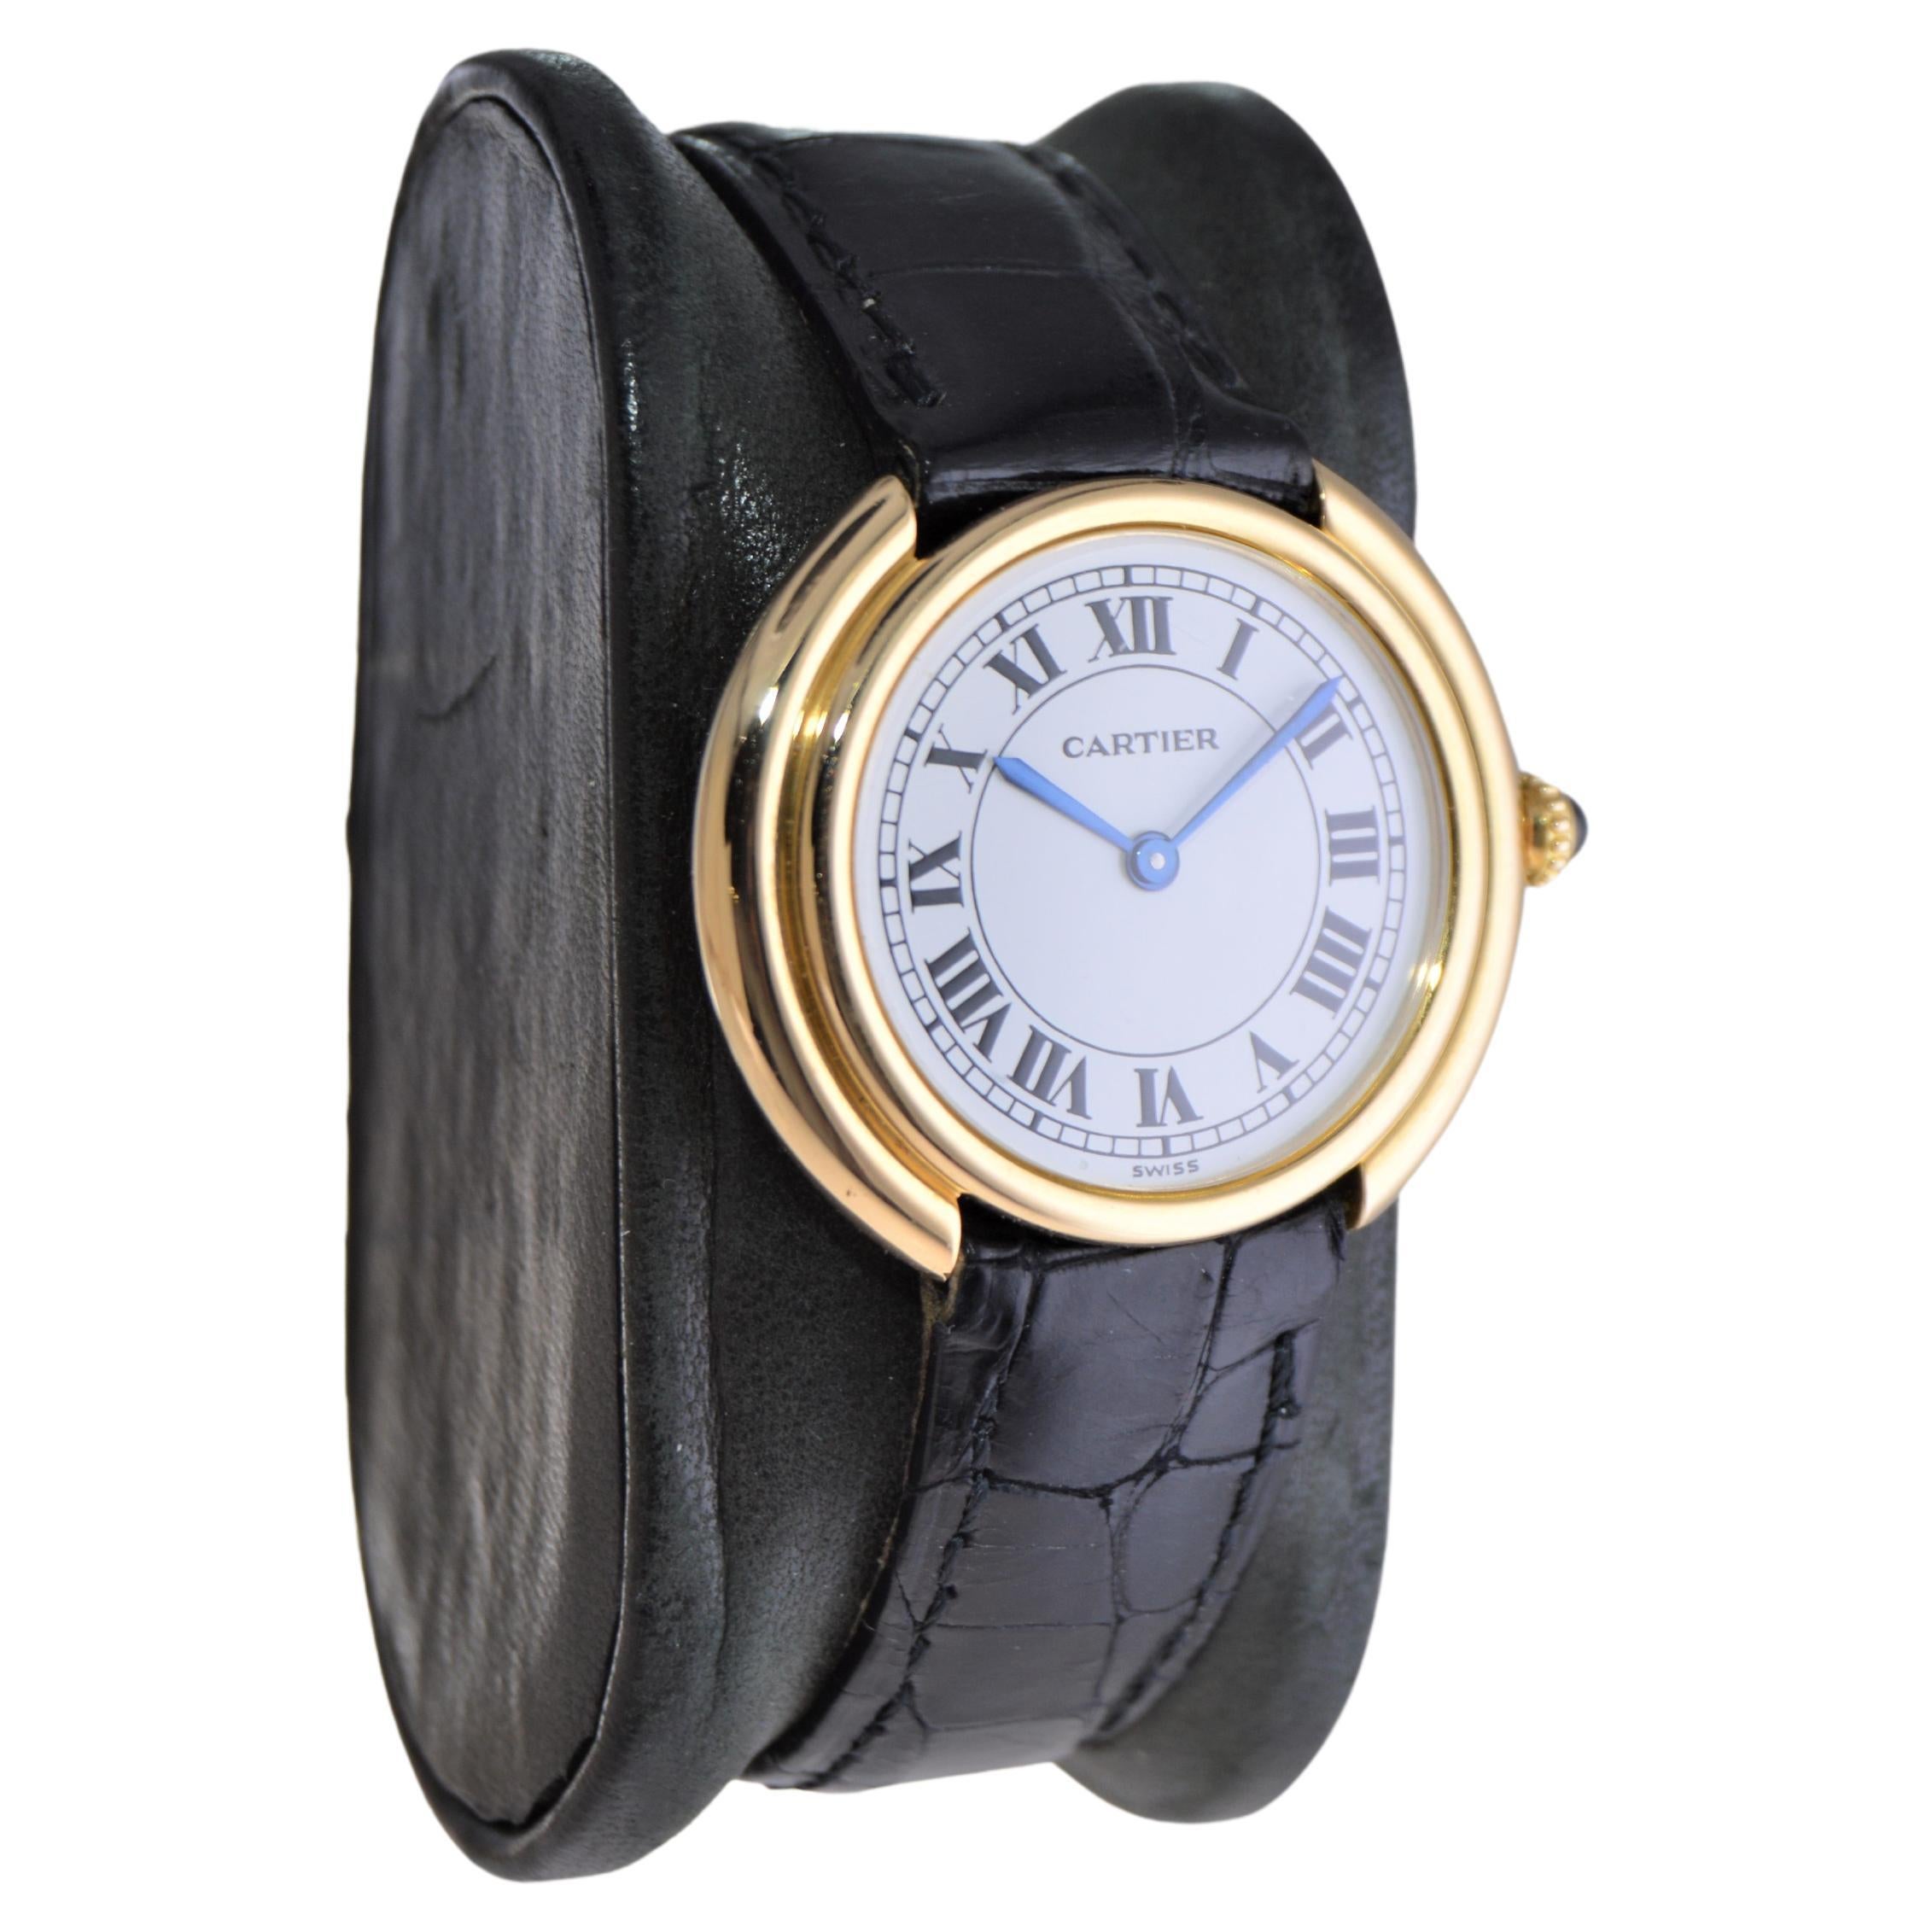 FACTORY / HOUSE: Cartier
STYLE / REFERENCE: Round Art Deco 
METAL / MATERIAL: 18Kt. Yellow Gold
CIRCA / YEAR: 1970's
DIMENSIONS / SIZE: Length 32mm X Diameter 28mm
MOVEMENT / CALIBER: Manual Winding / 17 Jewels 
DIAL / HANDS: Original White with